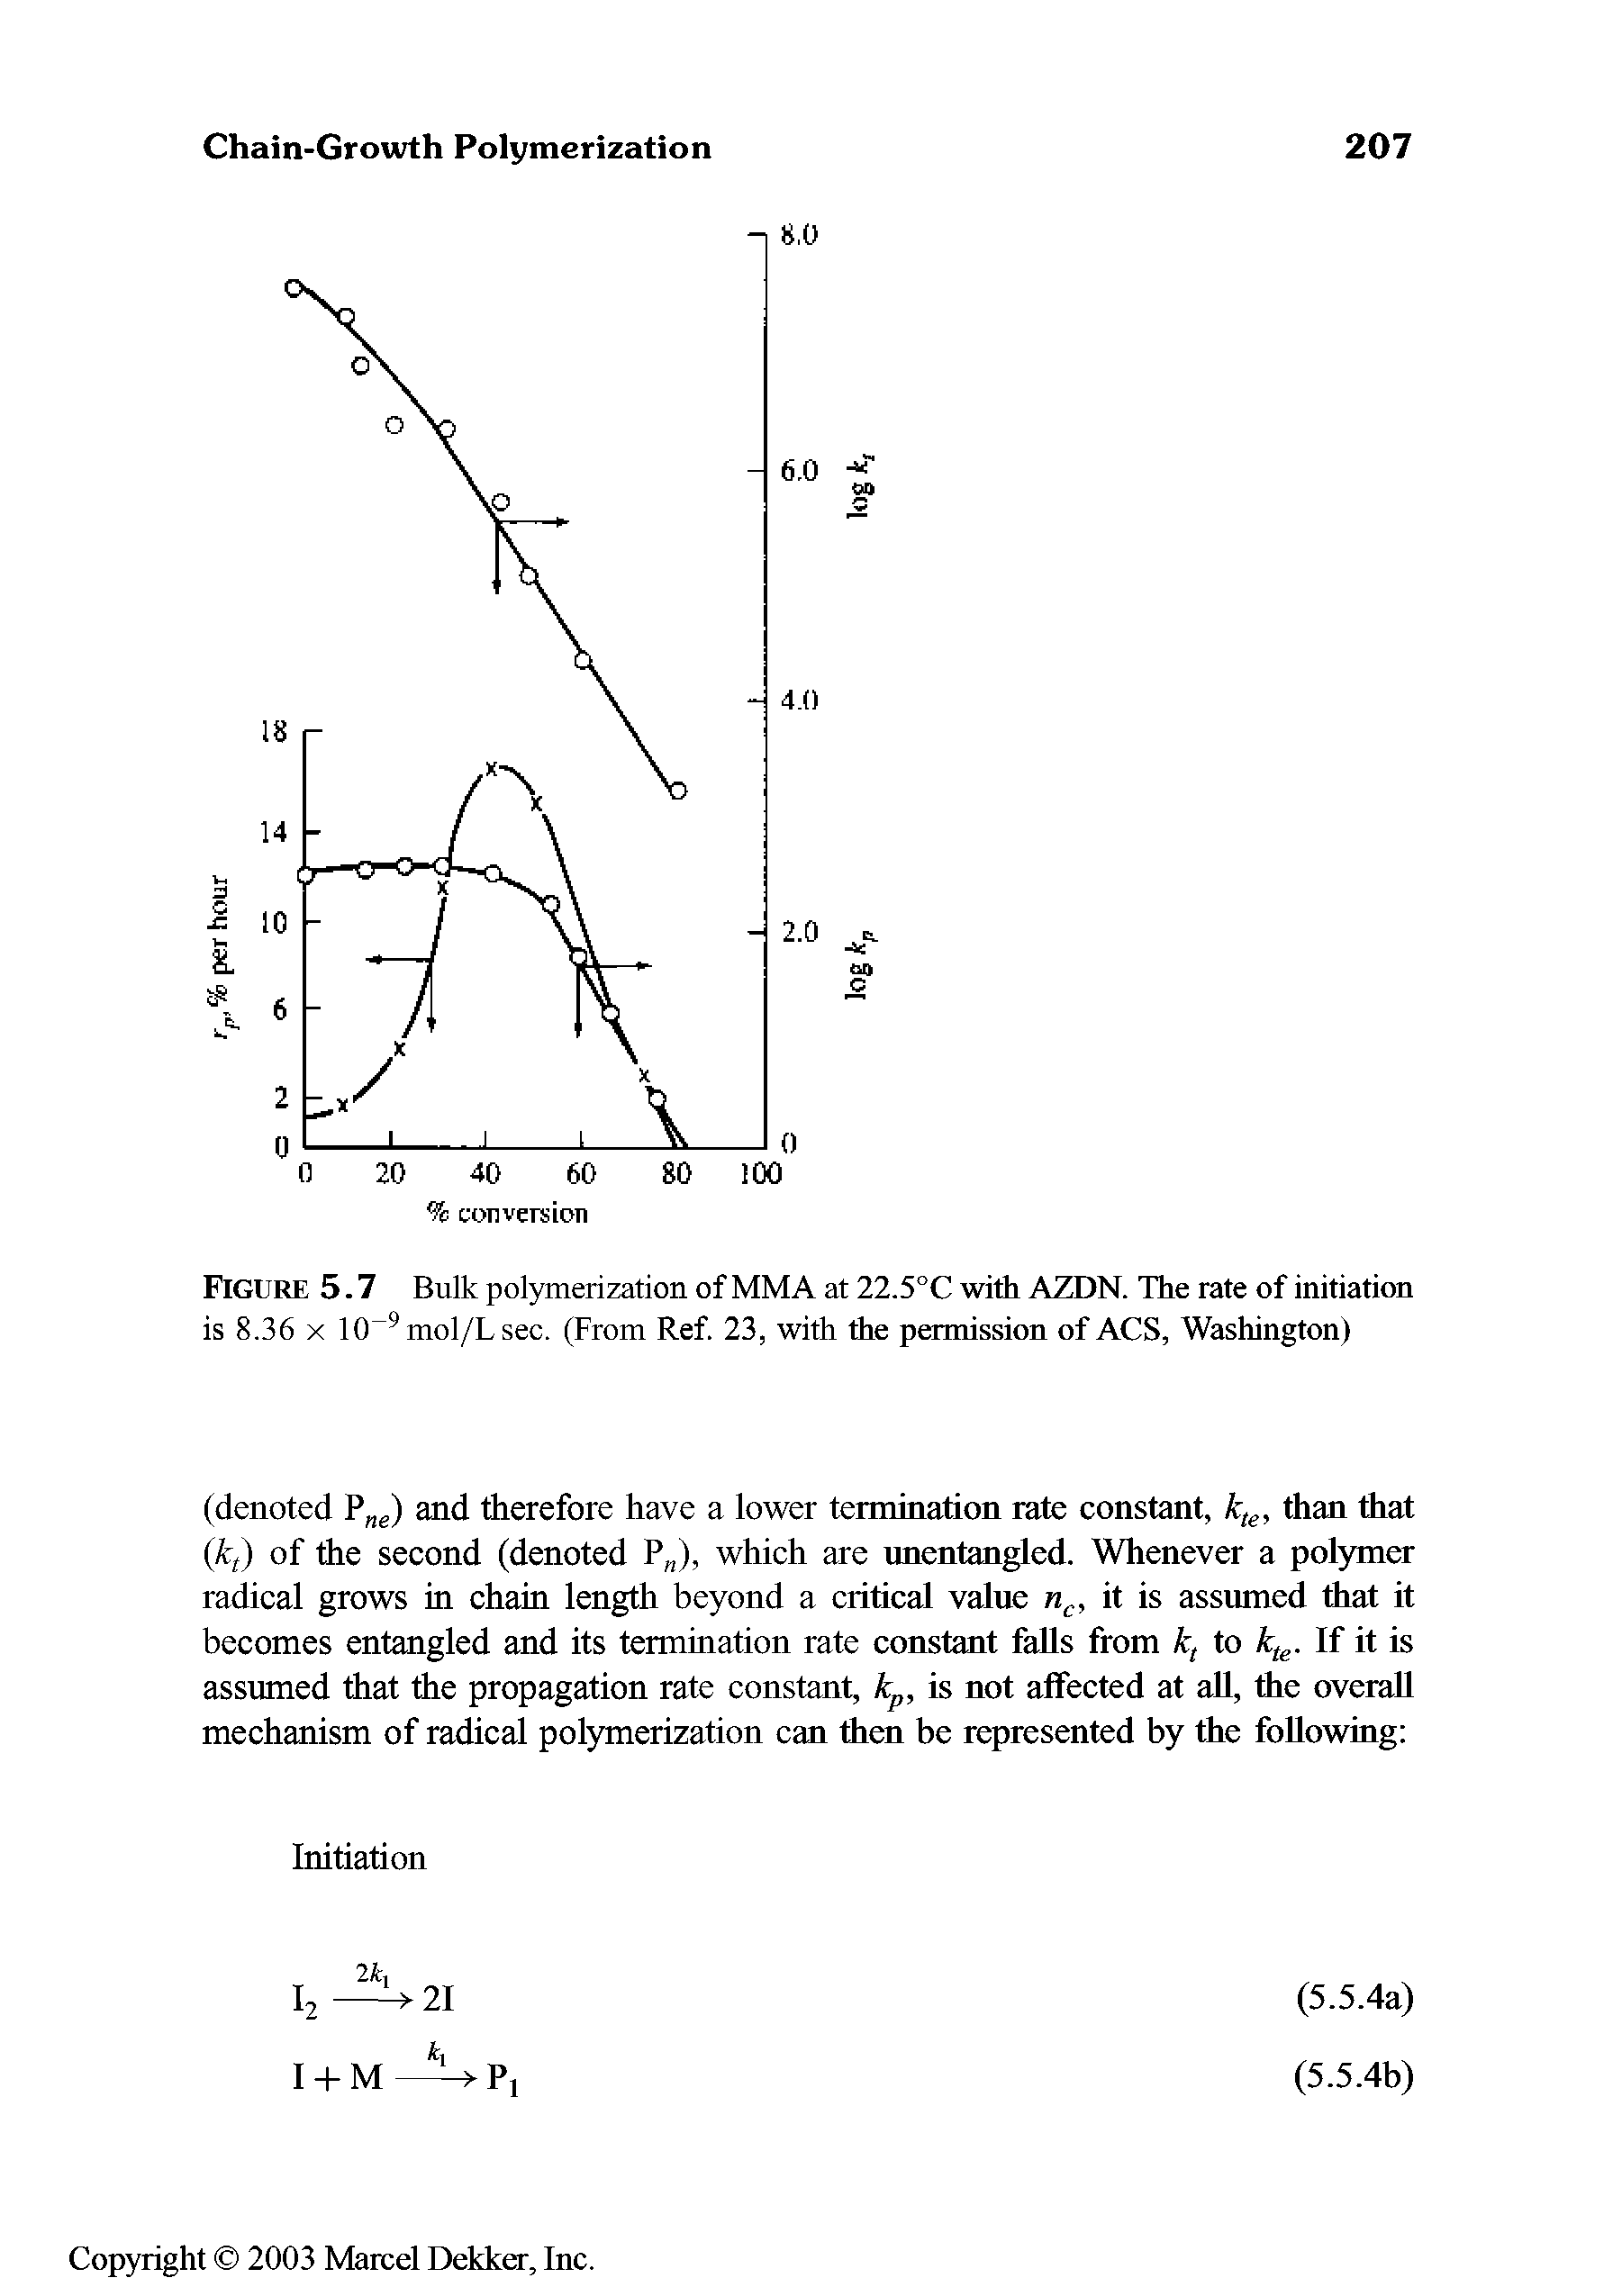 Figure 5.7 Bulk polymerization of MMA at 22.5°C with AZDN. The rate of initiation is 8.36 X 10 mol/Lsec. (From Ref. 23, with the permission of ACS, Washington)...